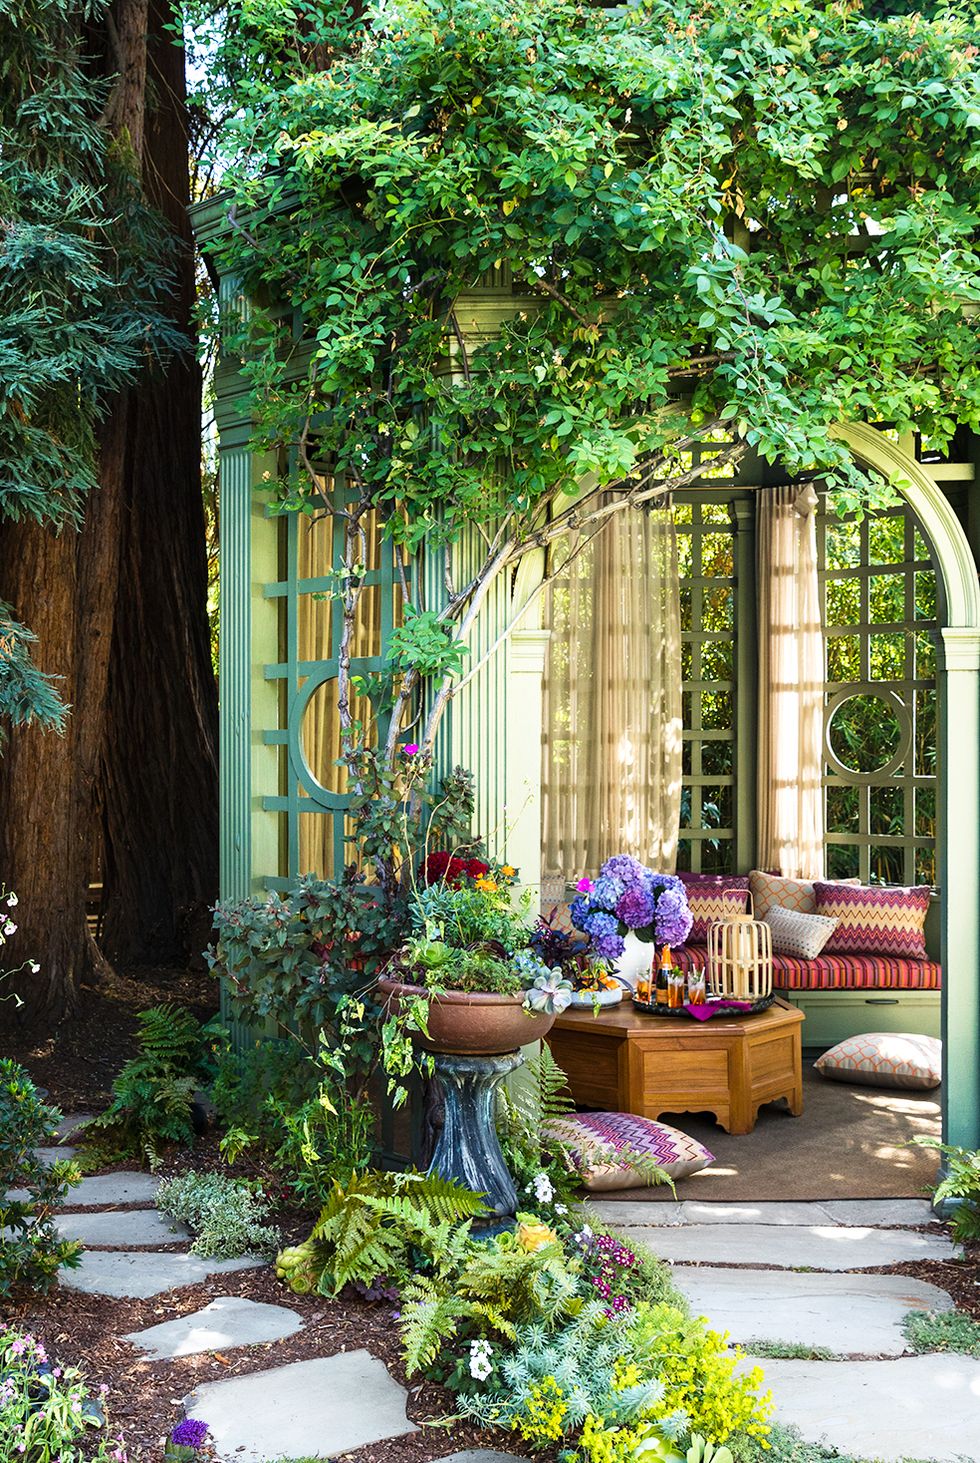 Big Style for Small Yards: Design Ideas to Transform Tiny Spaces